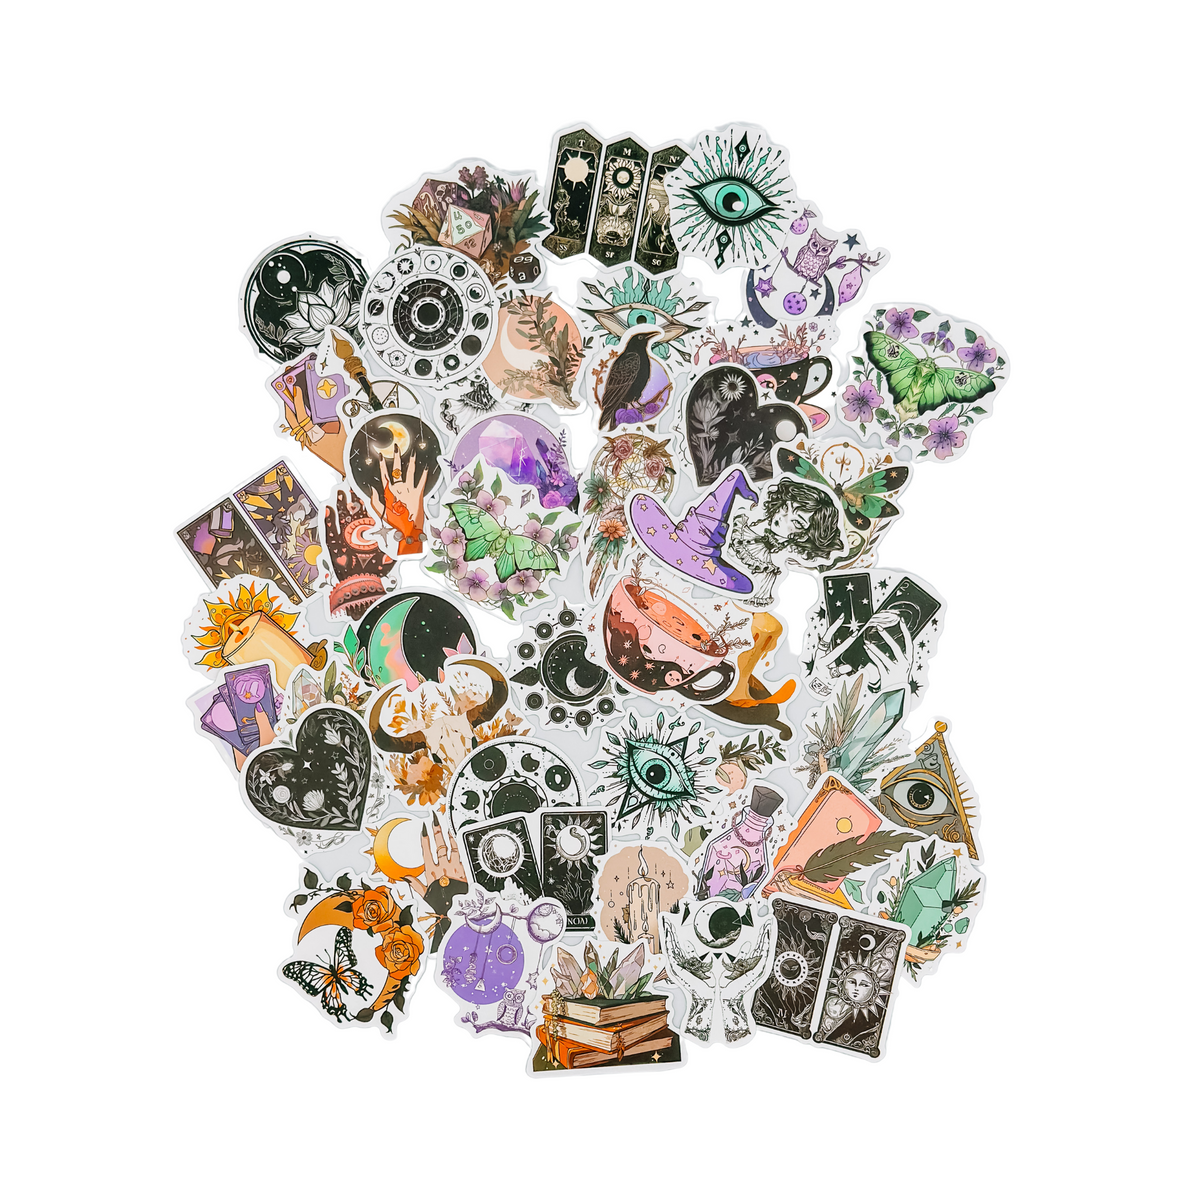 ☽ Witchy Stickers ☾ :: Behance